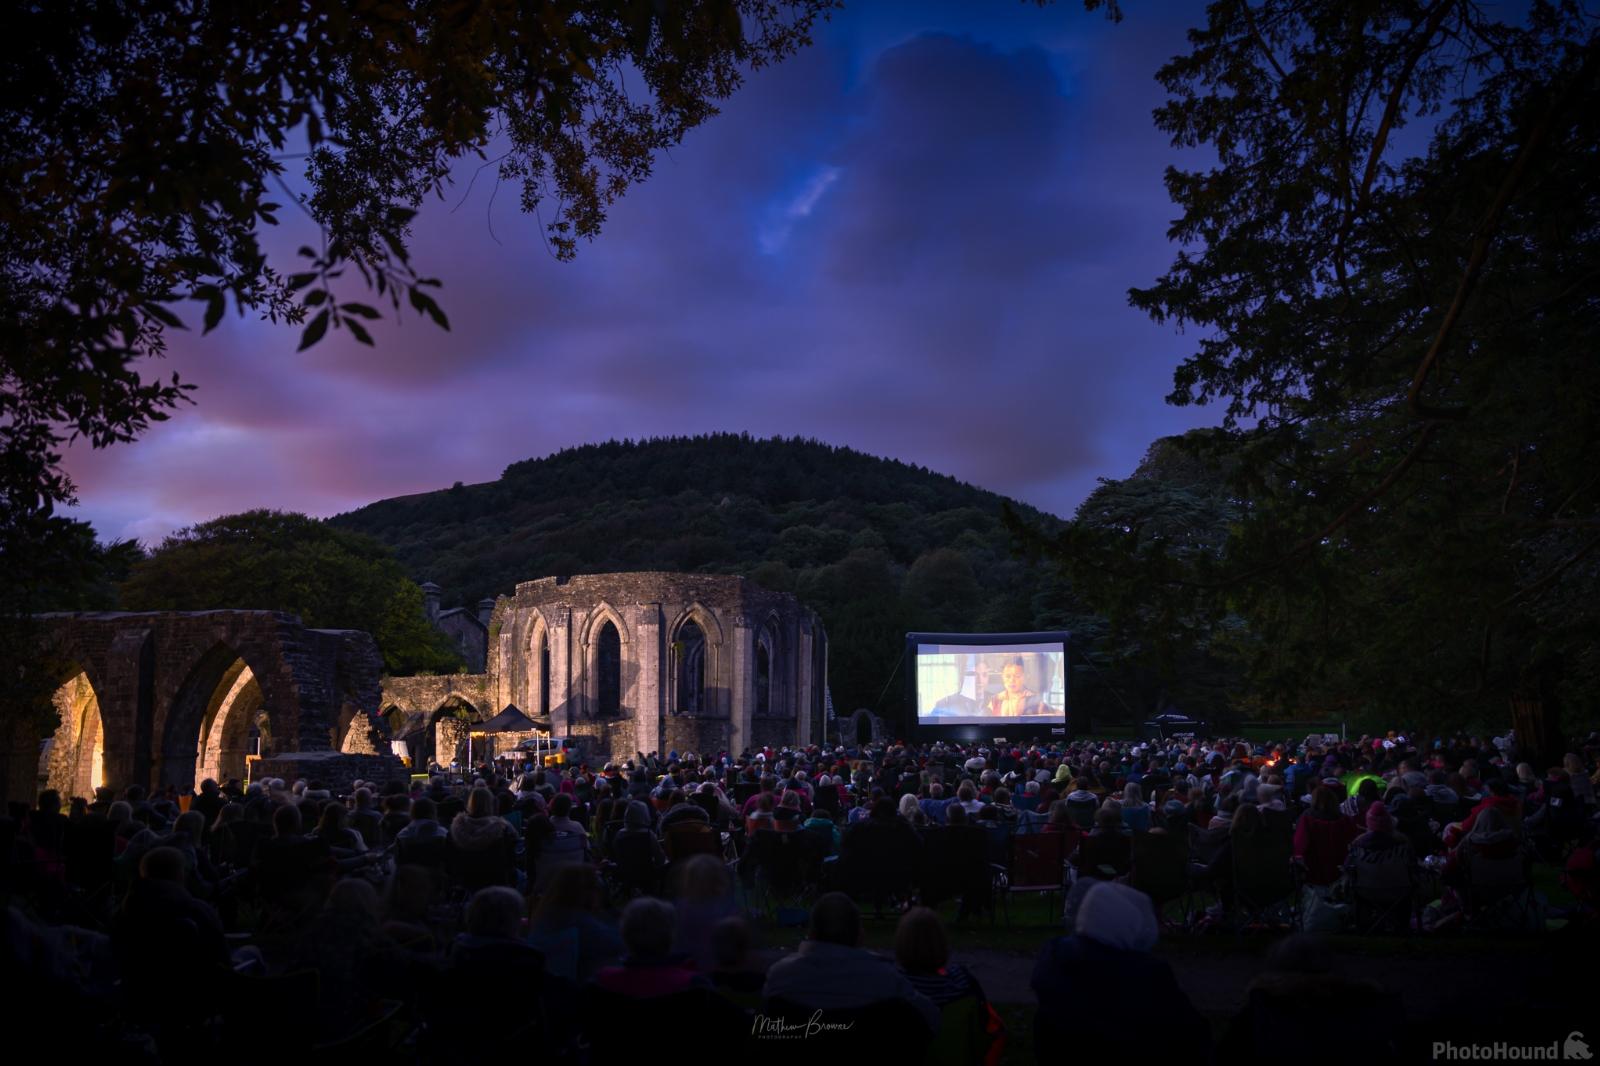 Image of Outdoor Cinema by Mathew Browne